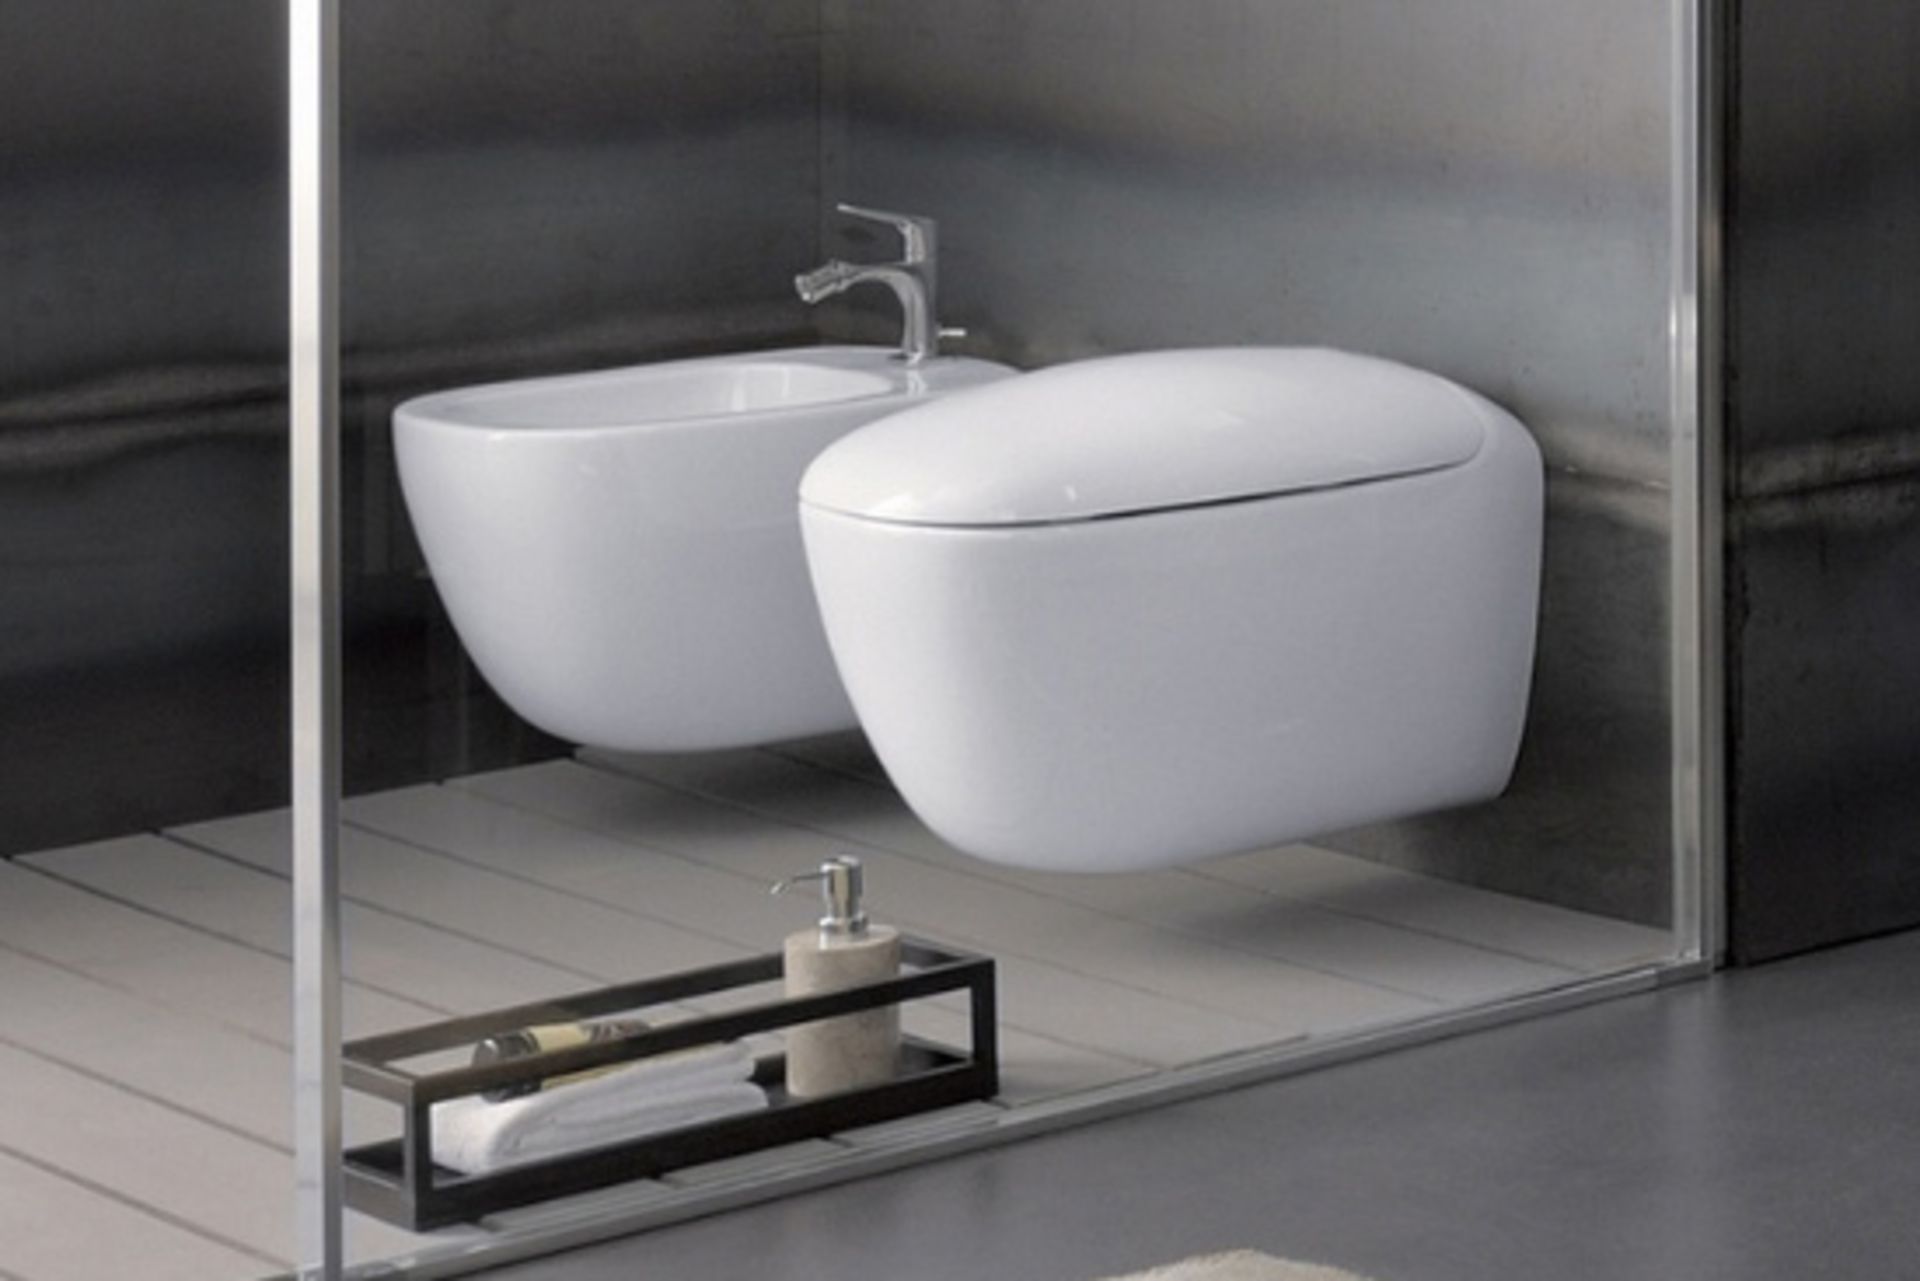 (XL36) Citterio Wall Hung Toilet RRP £427.99. Creates a chic,minimalist look. The Citterio ra...